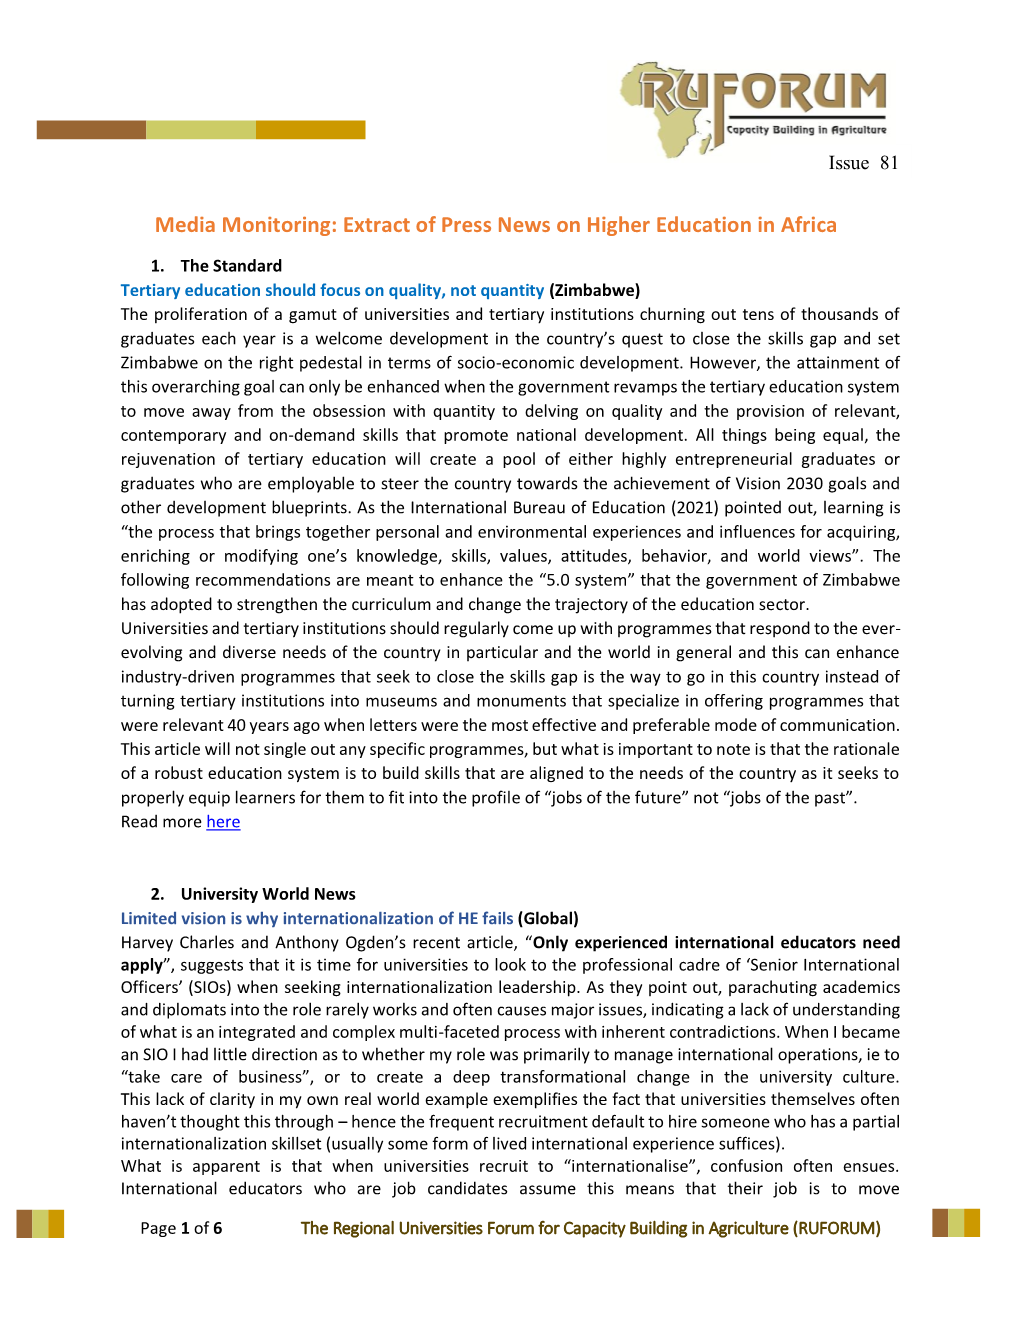 Media Monitoring: Extract of Press News on Higher Education in Africa